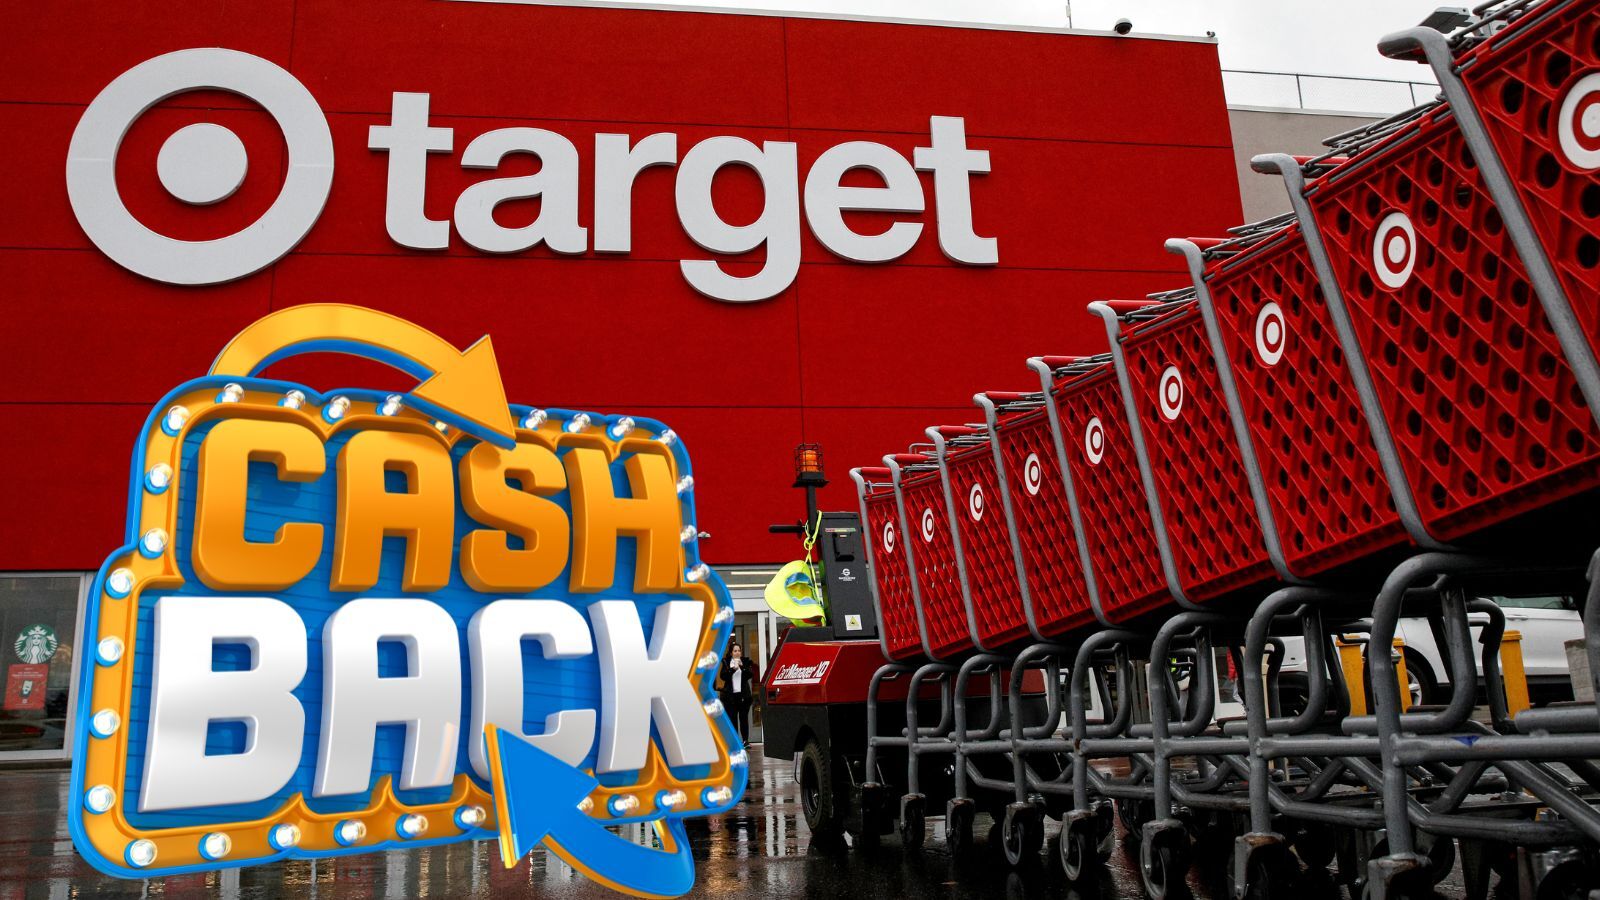 Does Target Do Cash Back? (Yes, But You Should Know This)